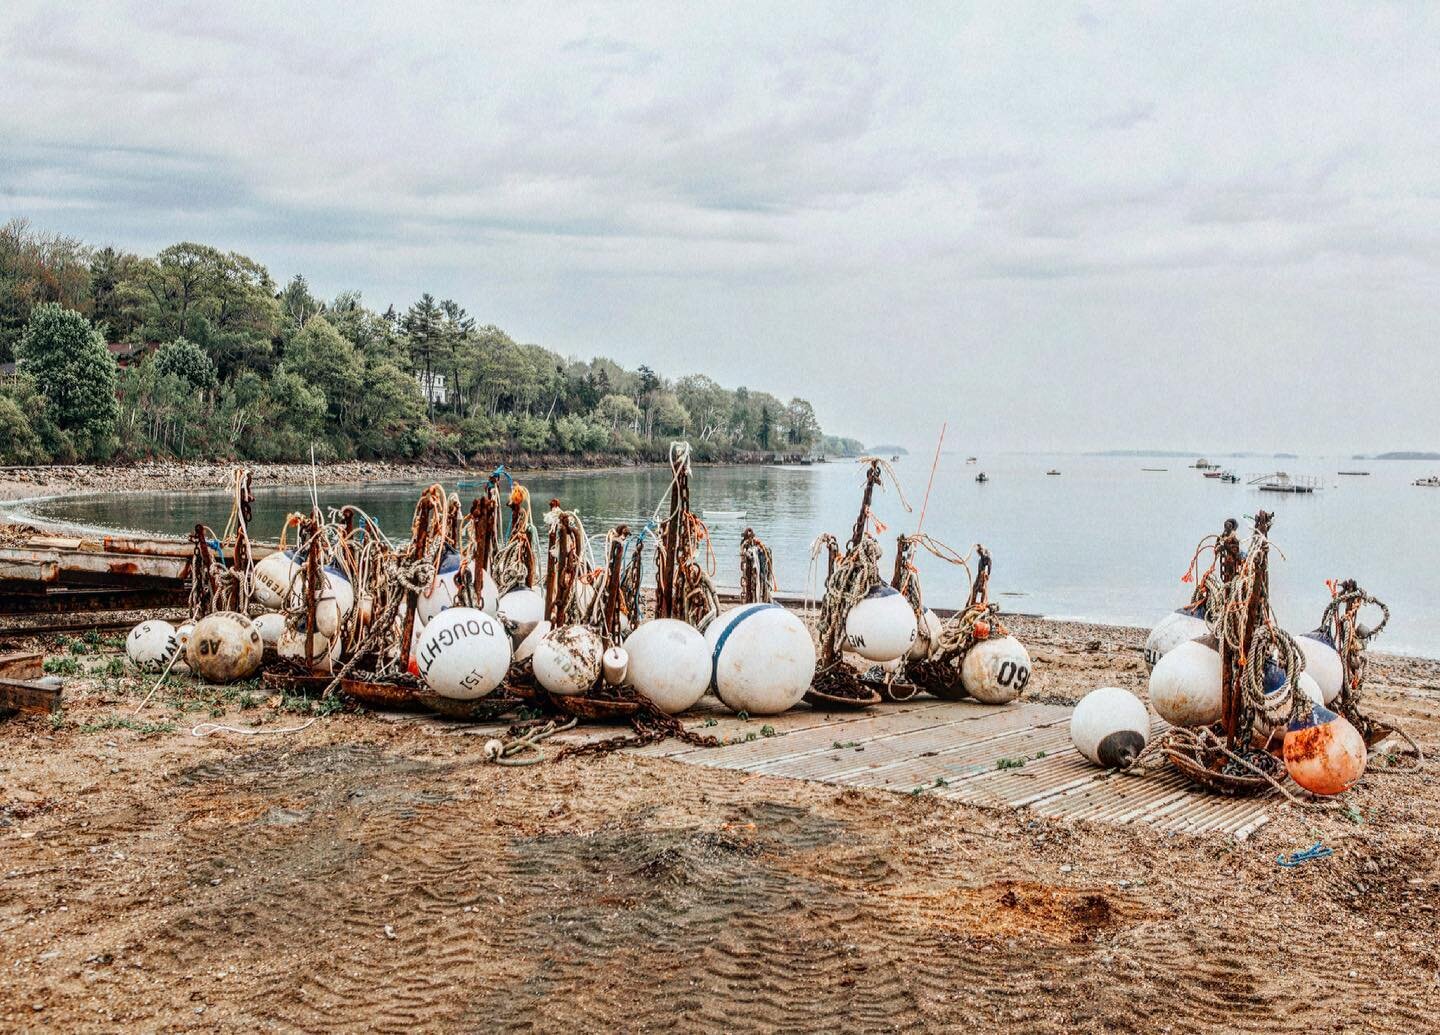 Is this a #buoy graveyard?